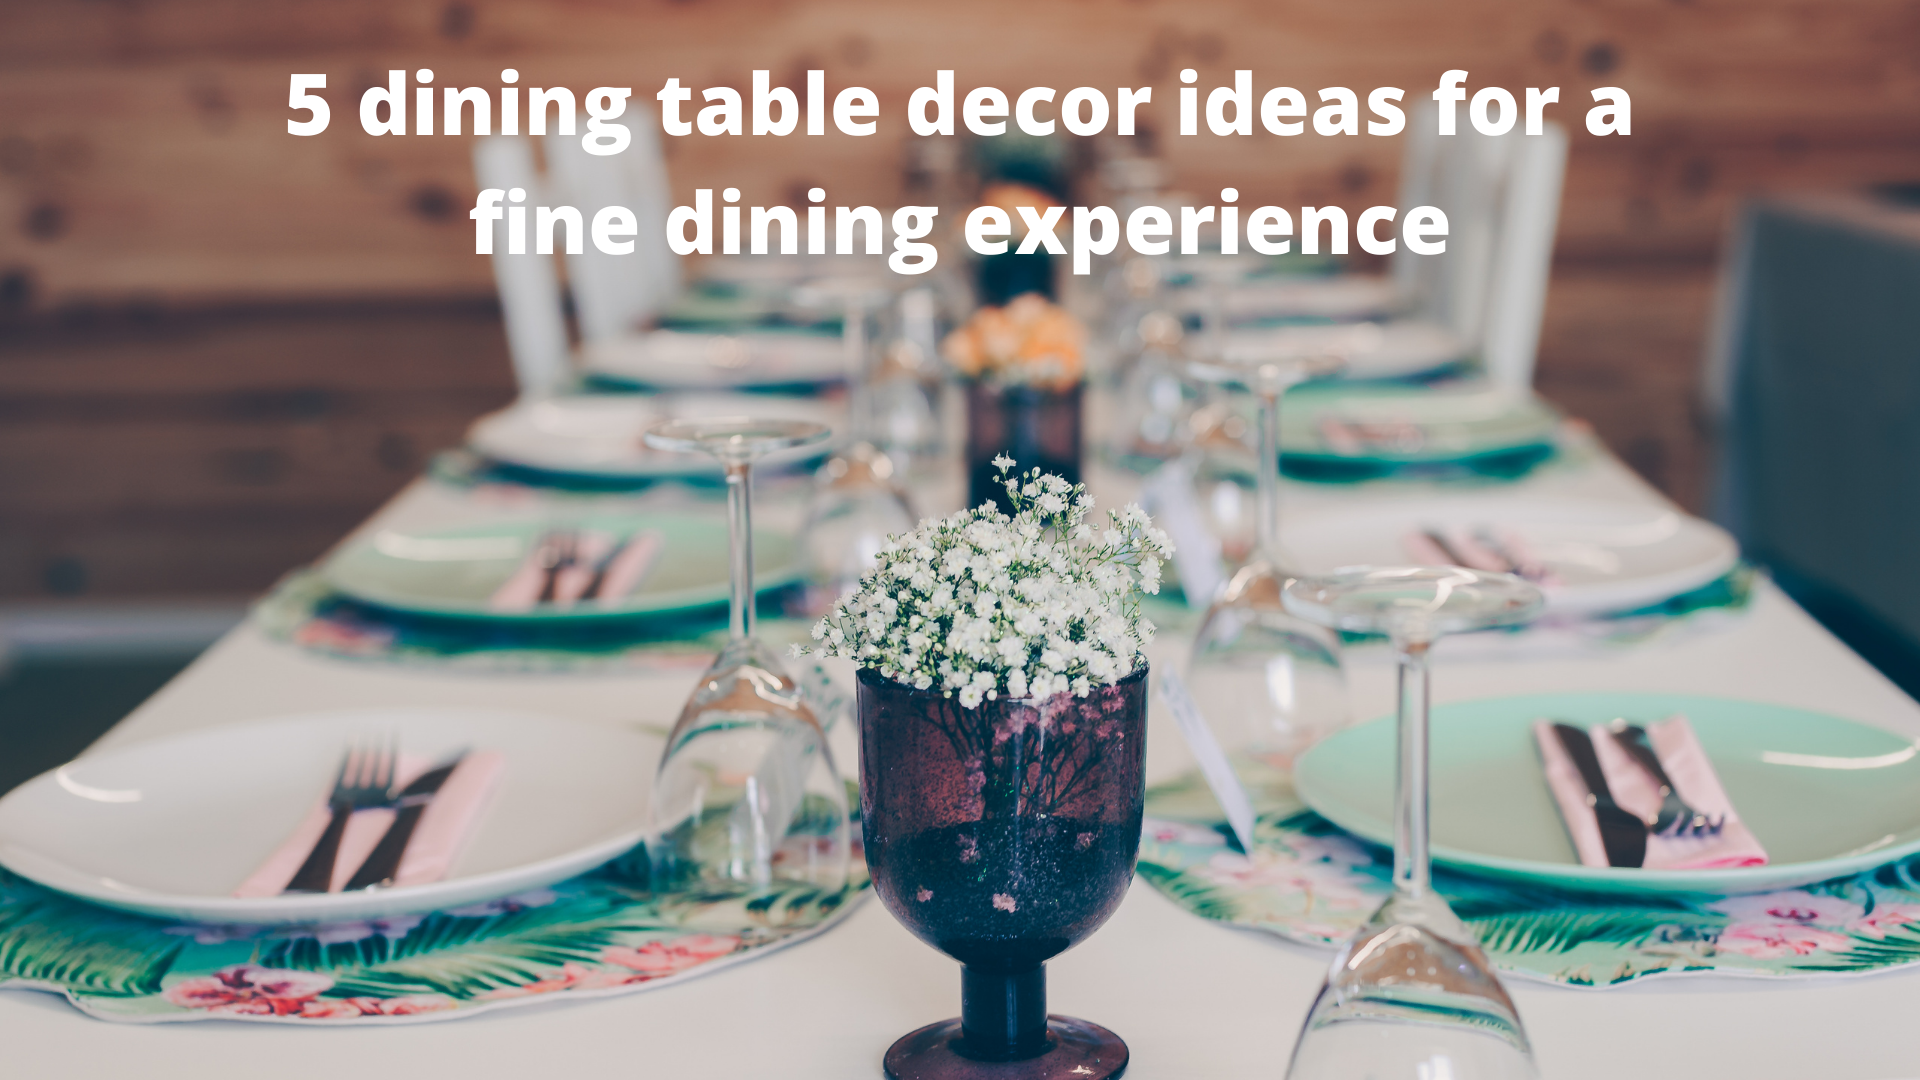 5 dining table decor ideas for a fine dining experience